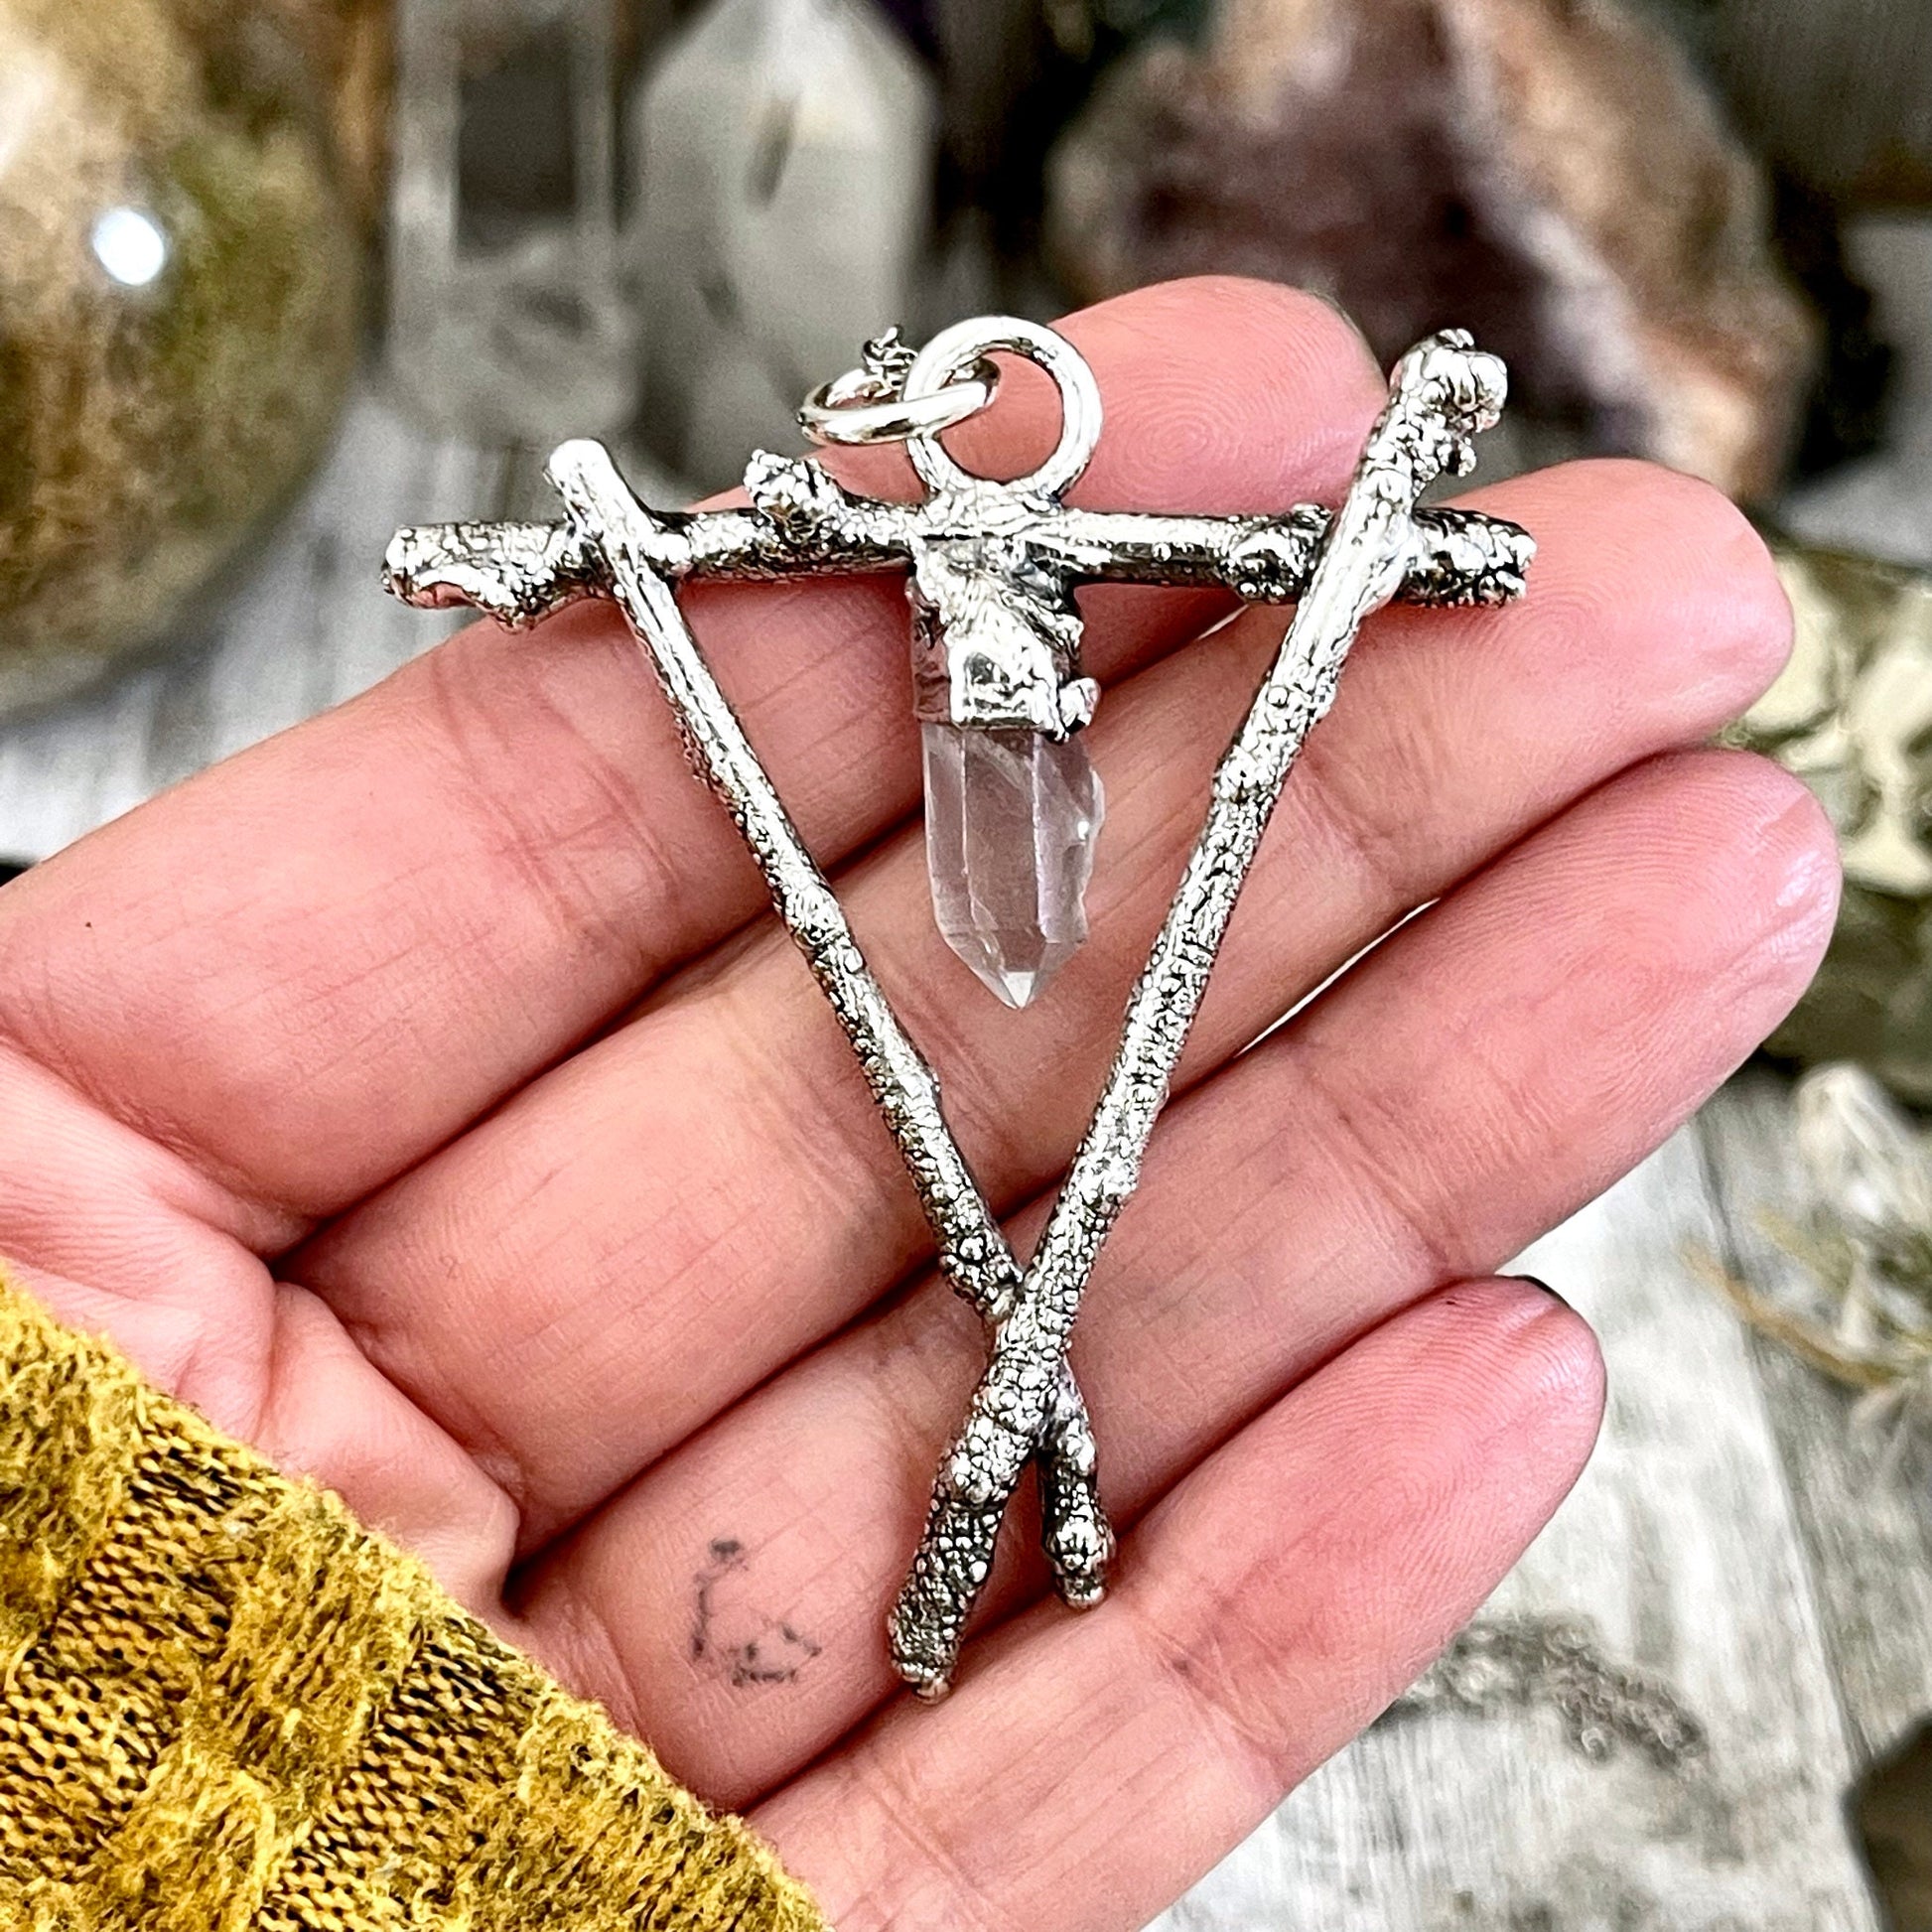 big crystal Necklace, Big Gothic Necklace, Bohemian Jewelry, clear quartz, Crystal Necklaces, Crystal Pendant, Etsy ID: 1587028390, FOXLARK- NECKLACES, Jewelry, nature inspired, Necklaces, Silver Jewelry, Silver Necklace, Silver Stone Jewelry, Statement N